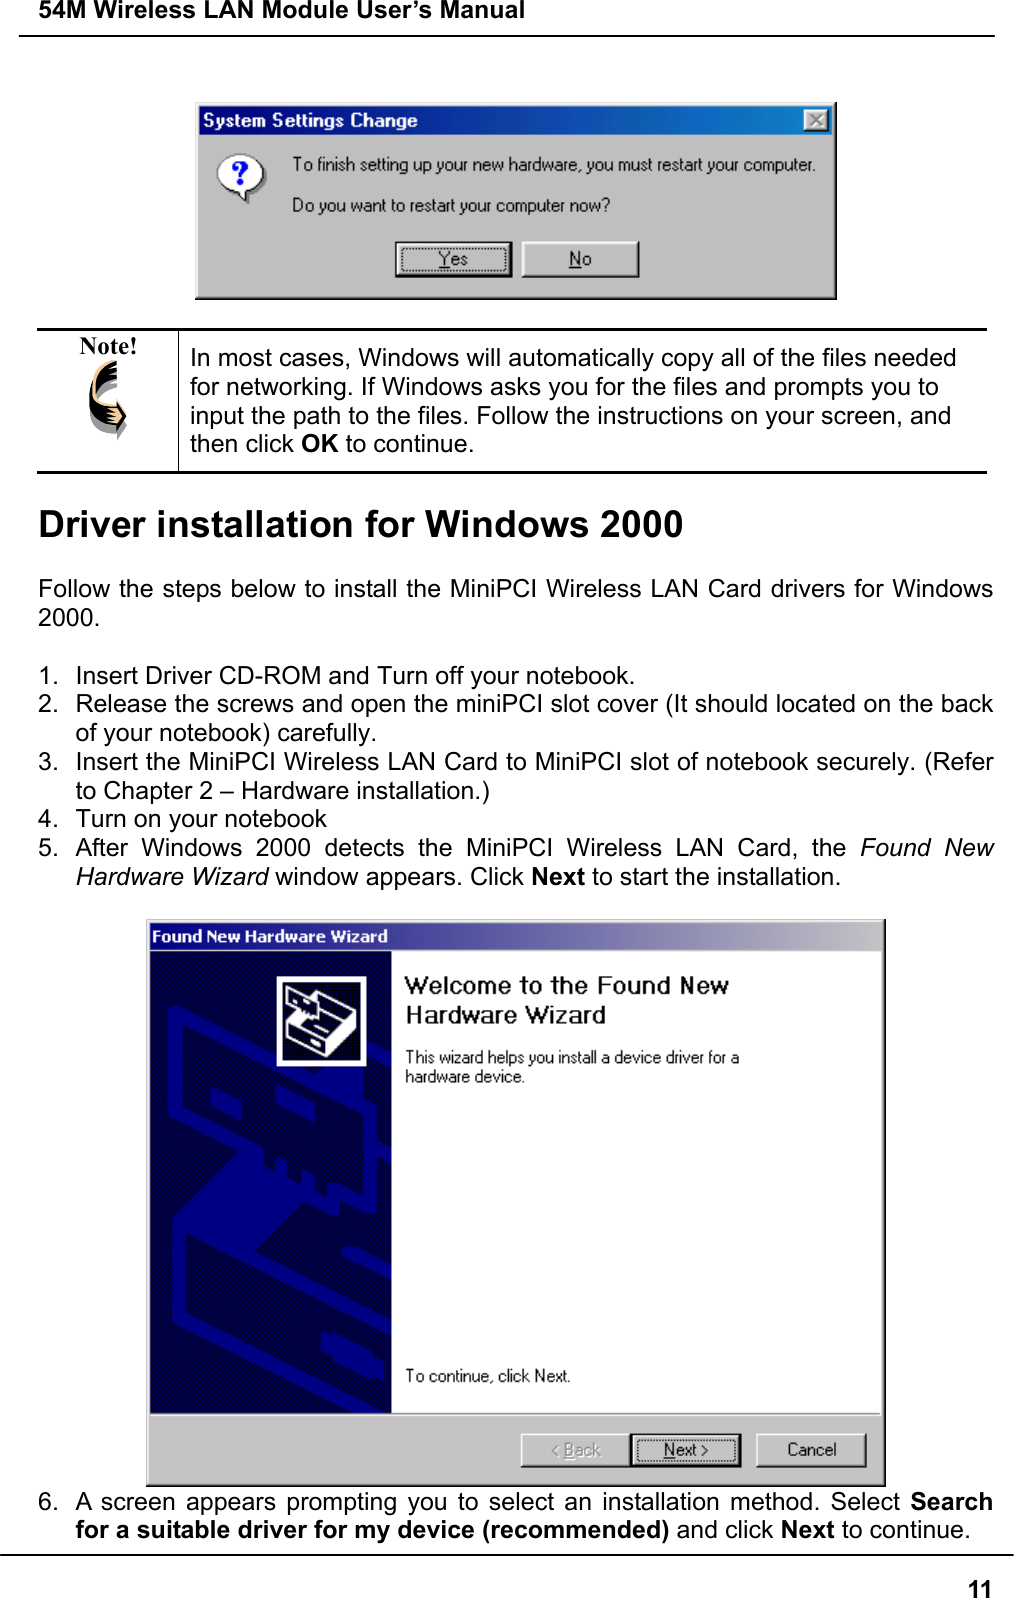 54M Wireless LAN Module User’s Manual  11   Note!  In most cases, Windows will automatically copy all of the files needed for networking. If Windows asks you for the files and prompts you to input the path to the files. Follow the instructions on your screen, and then click OK to continue.  Driver installation for Windows 2000  Follow the steps below to install the MiniPCI Wireless LAN Card drivers for Windows 2000.  1.  Insert Driver CD-ROM and Turn off your notebook. 2.  Release the screws and open the miniPCI slot cover (It should located on the back of your notebook) carefully. 3.  Insert the MiniPCI Wireless LAN Card to MiniPCI slot of notebook securely. (Refer to Chapter 2 – Hardware installation.) 4.  Turn on your notebook 5.  After Windows 2000 detects the MiniPCI Wireless LAN Card, the Found New Hardware Wizard window appears. Click Next to start the installation.   6.  A screen appears prompting you to select an installation method. Select Search for a suitable driver for my device (recommended) and click Next to continue.  